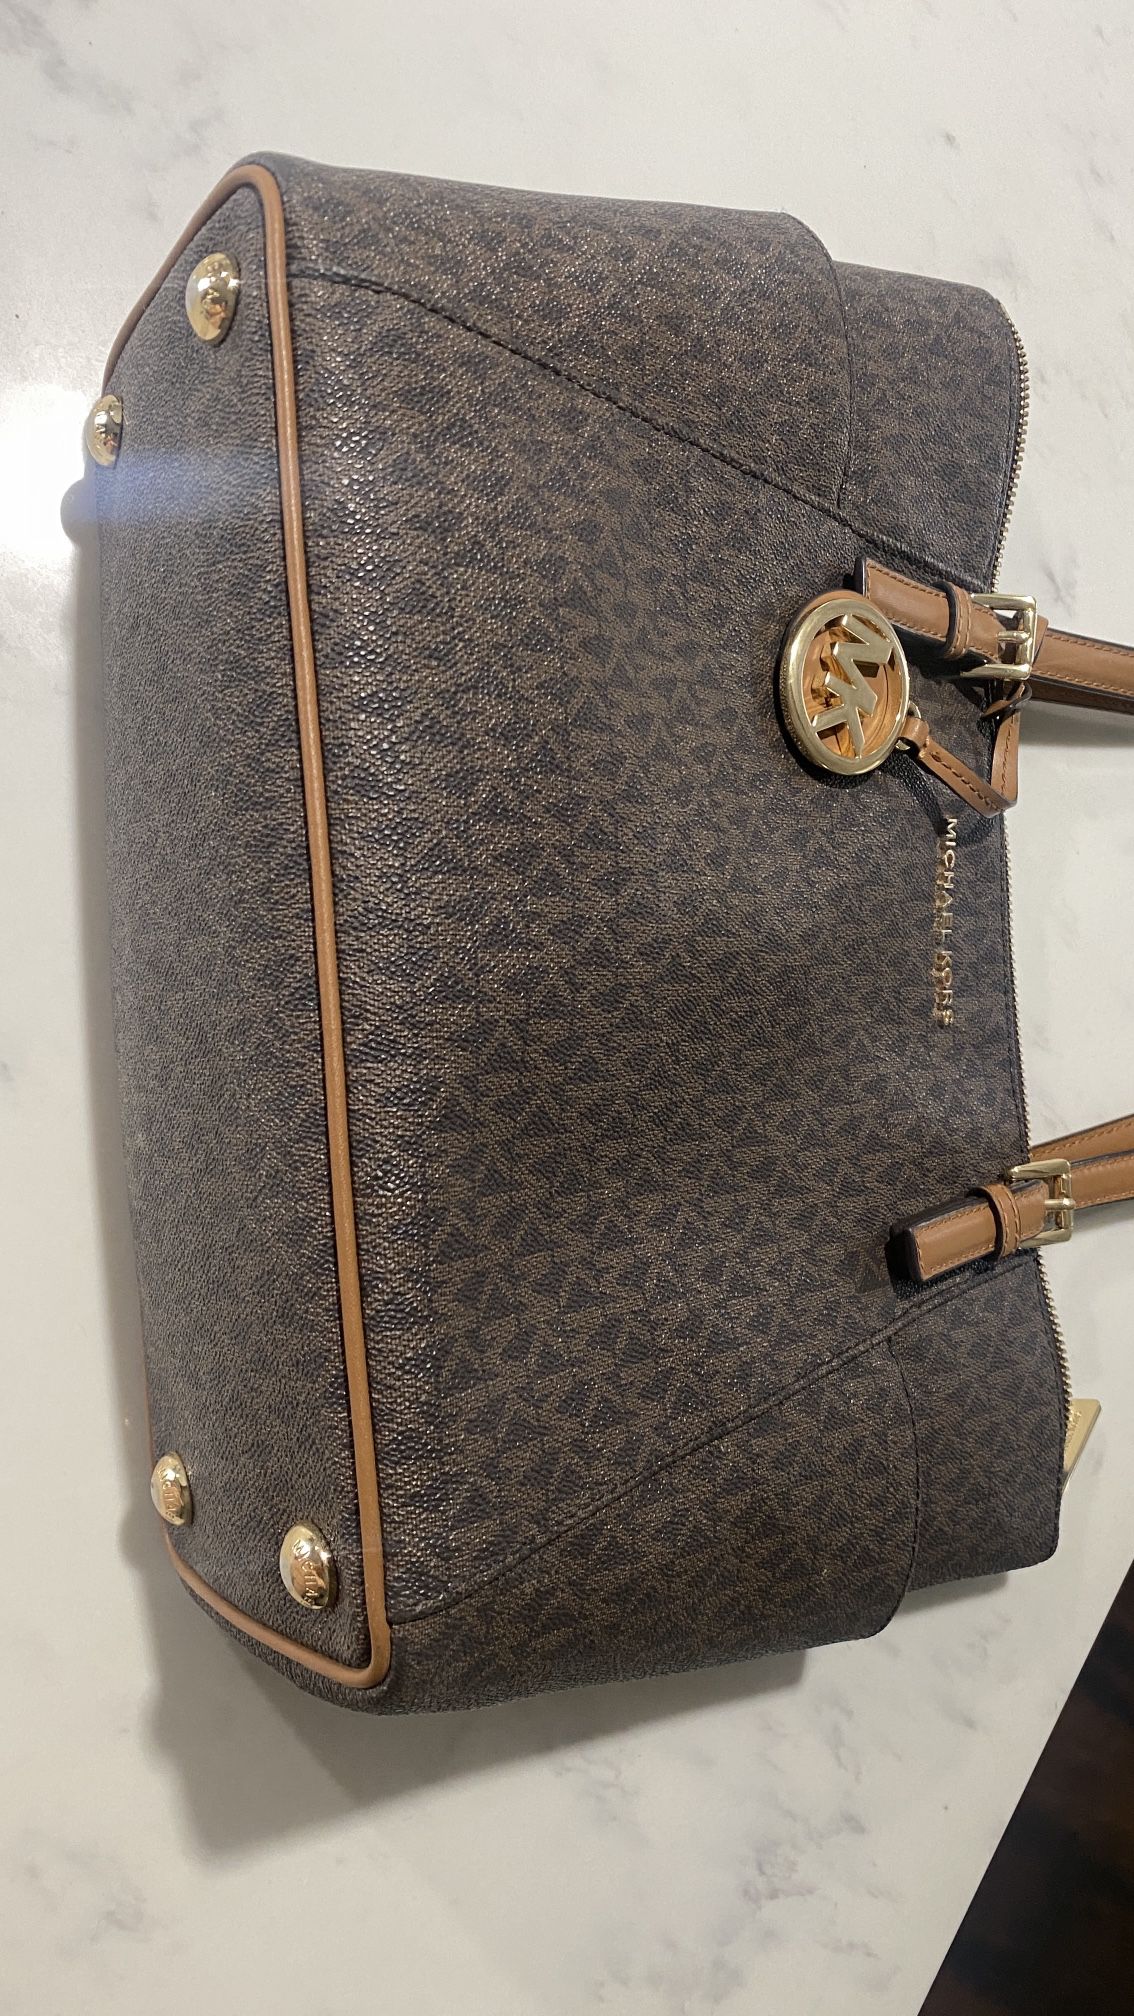 Micheal Kors Voyager Medium Crossgrain Leather Tote Bag for Sale in  Montgomery, TX - OfferUp